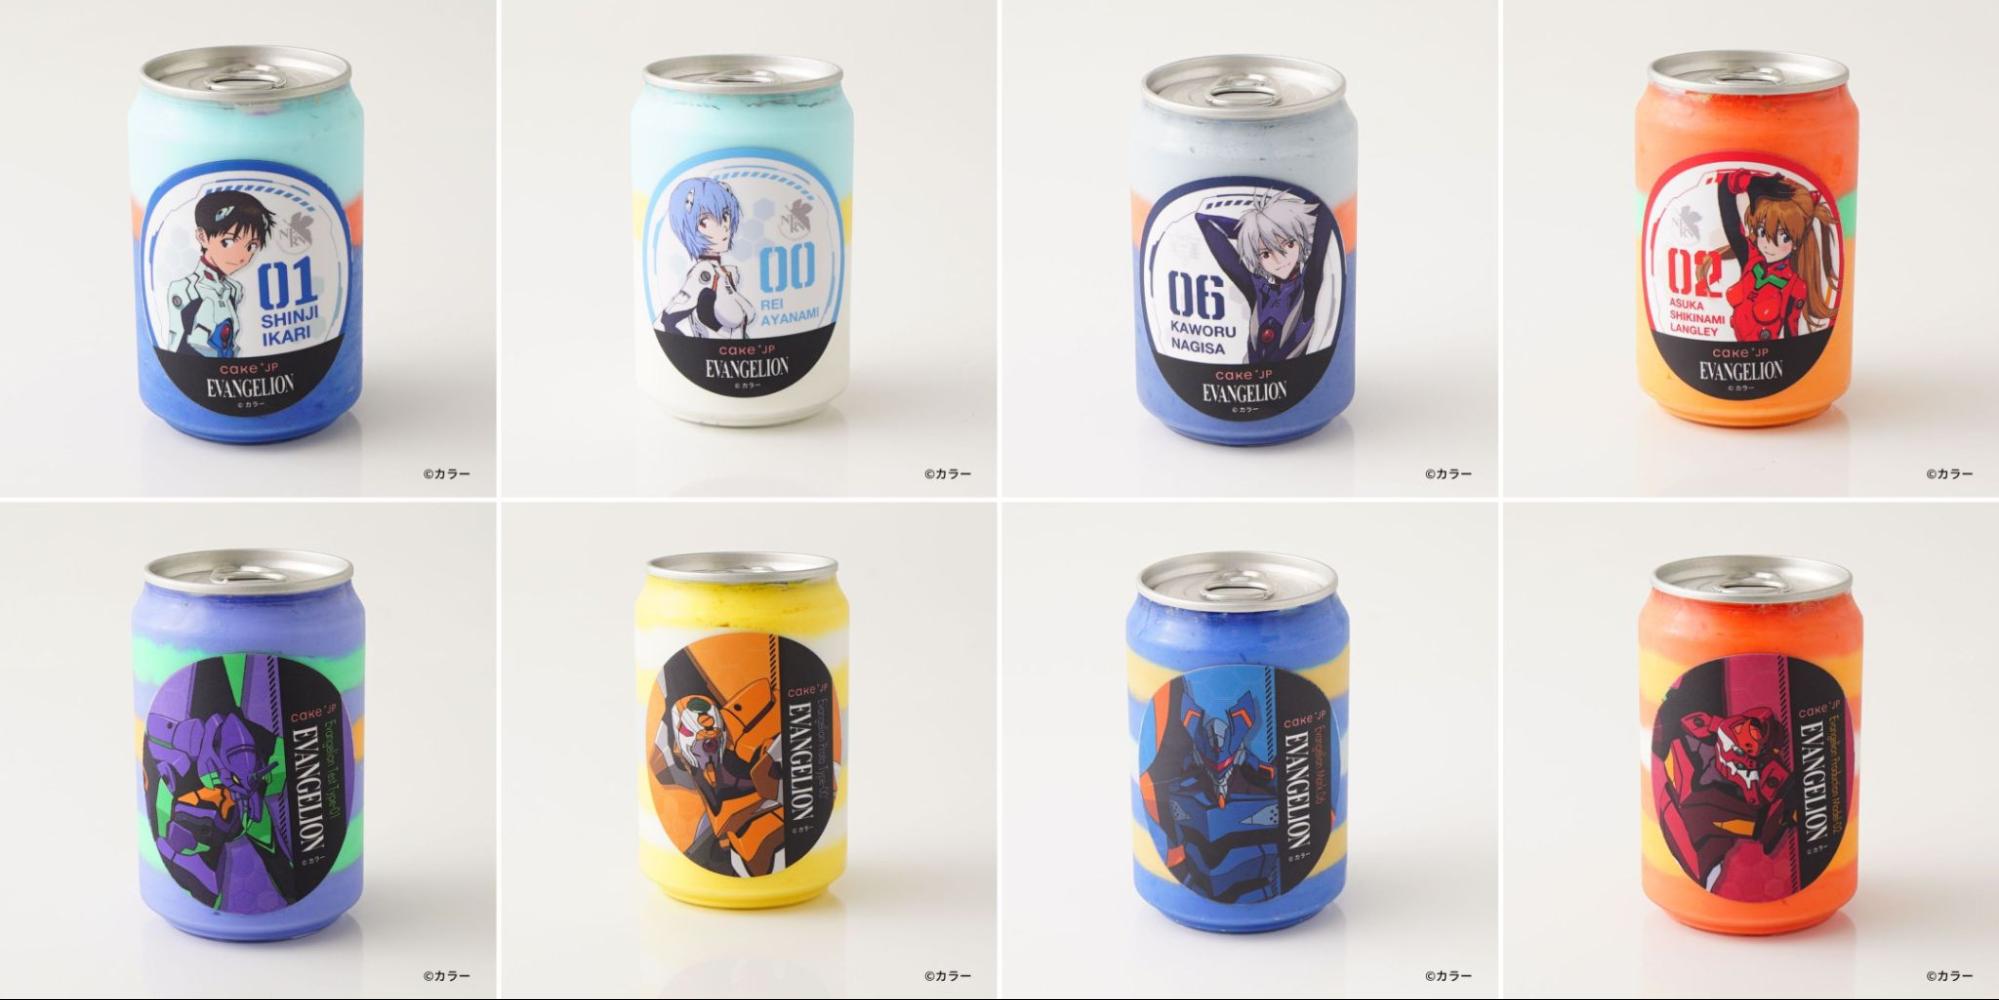 evangelion cakes in a can